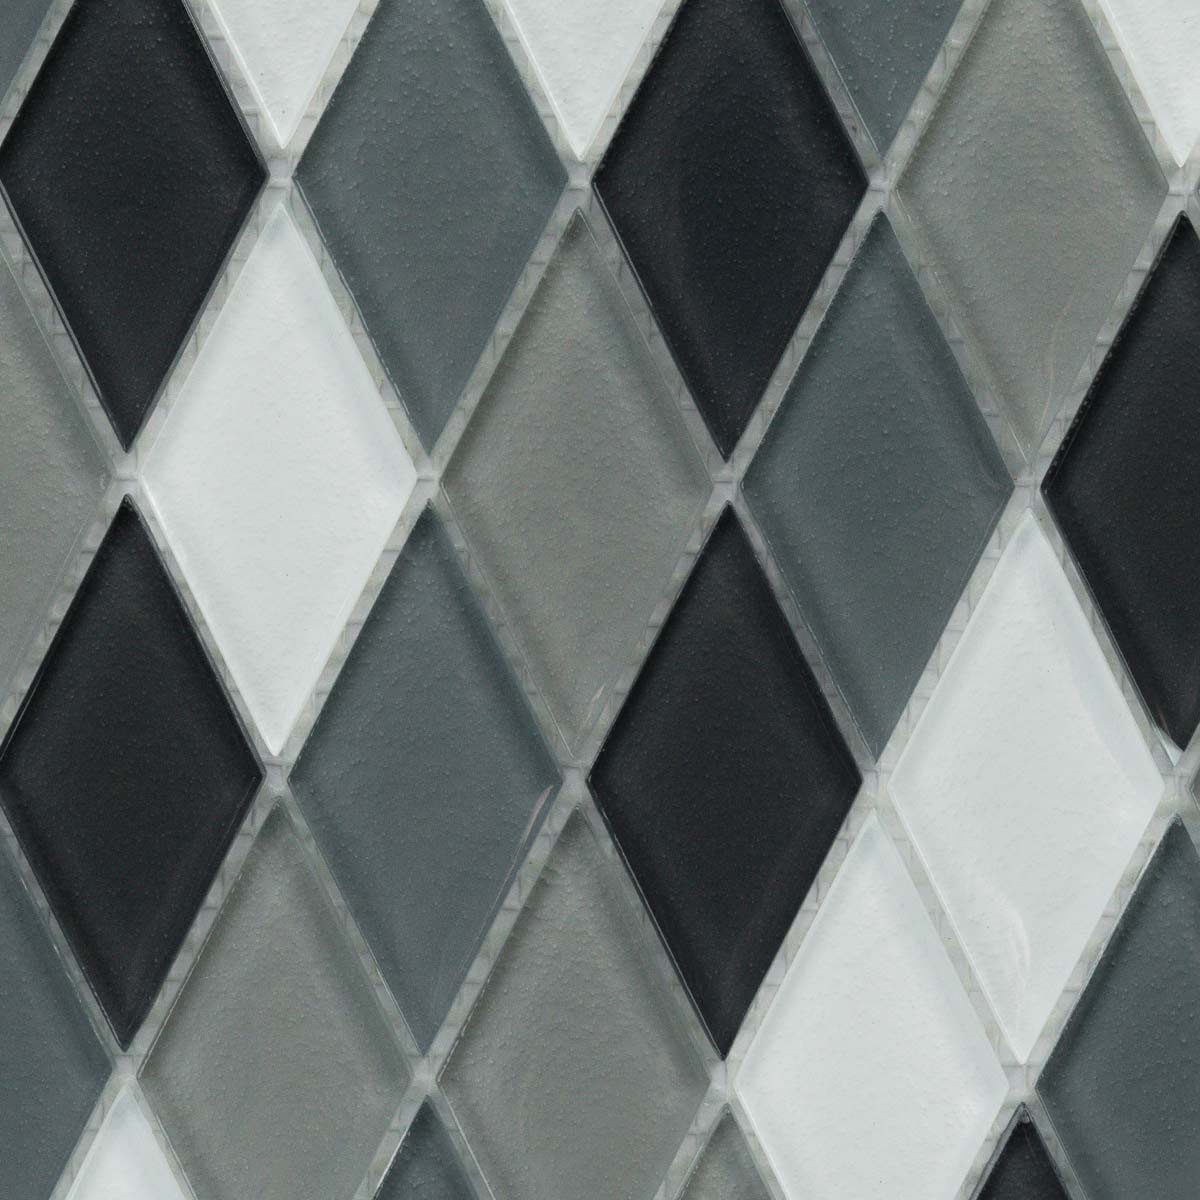 Structured Tile